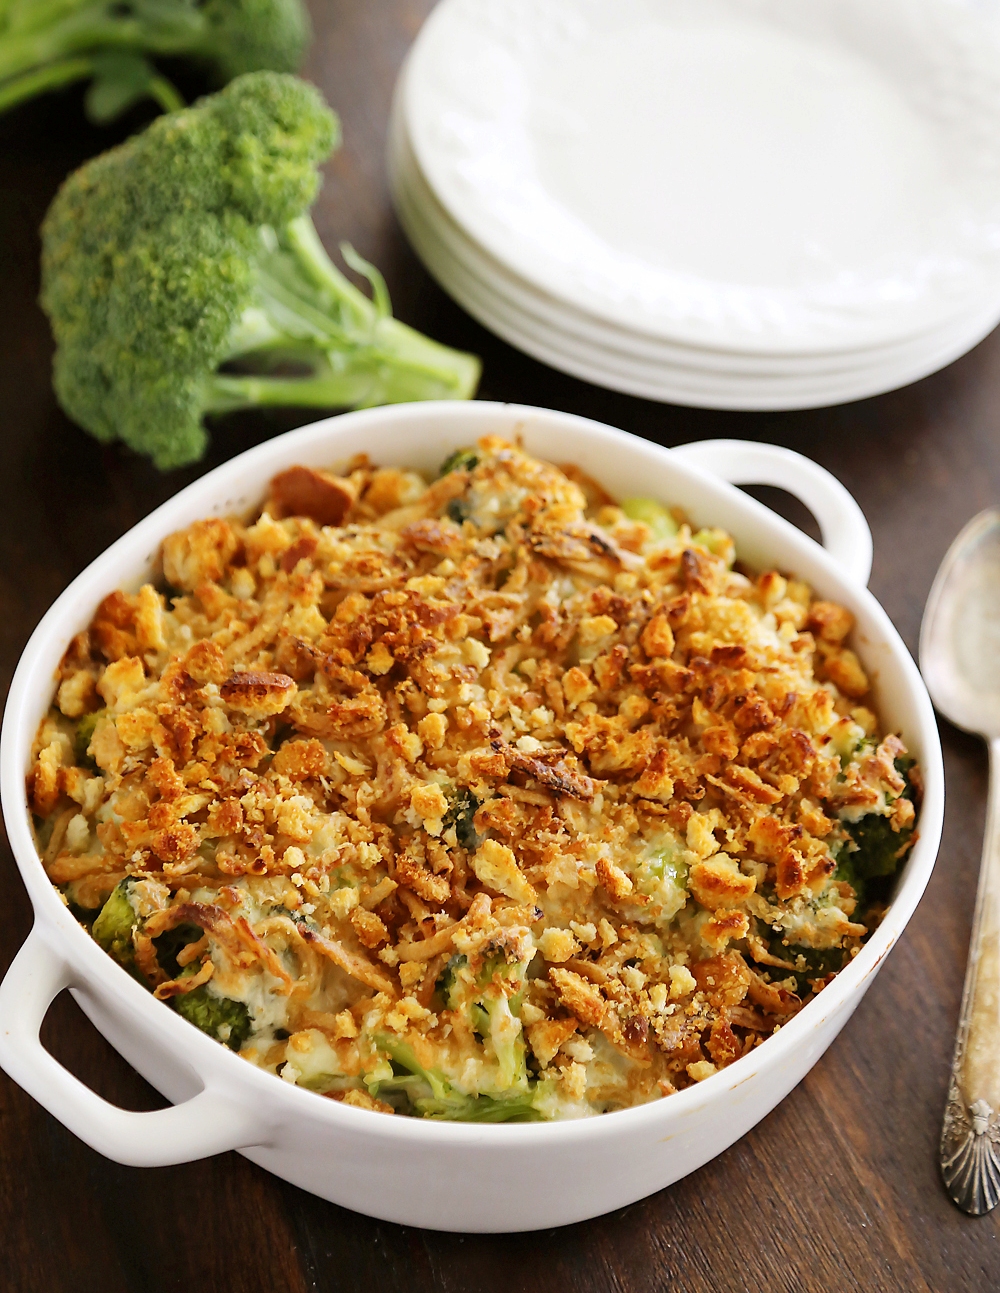 Broccoli Cheese Casserole With French Fried Onions - Broccoli Walls